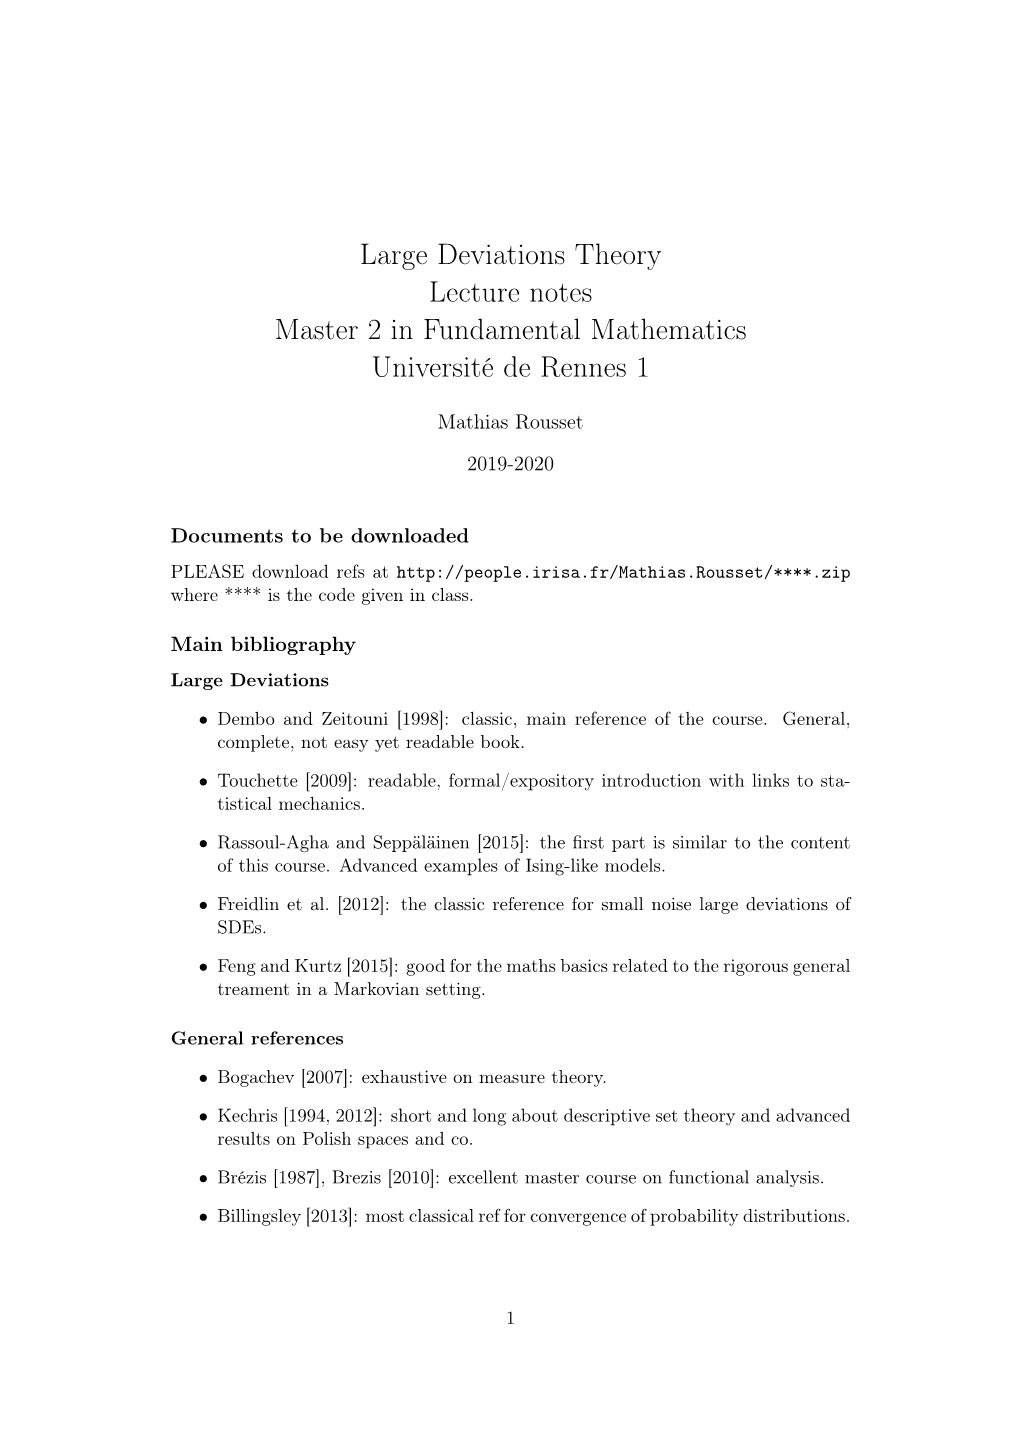 Large Deviations Theory Lecture Notes Master 2 in Fundamental Mathematics Université De Rennes 1